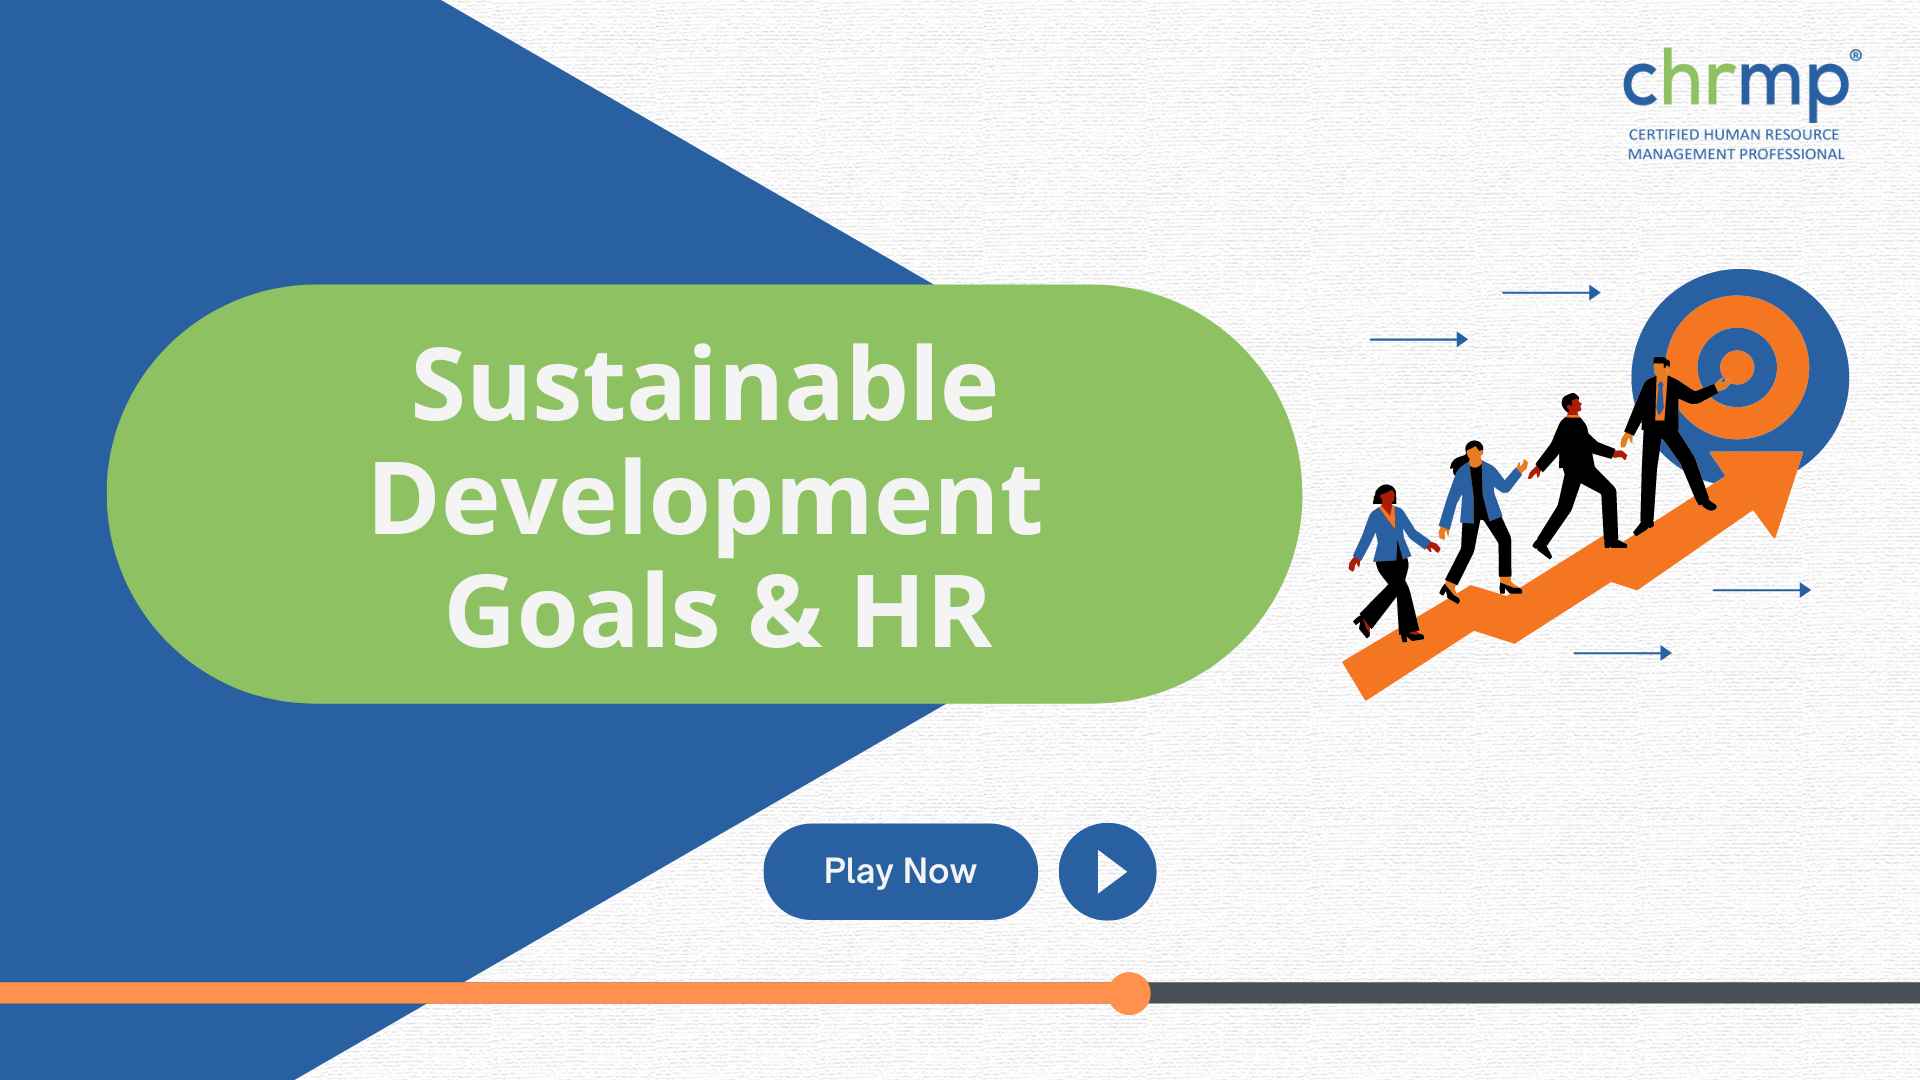 Sustainable development goals and HR